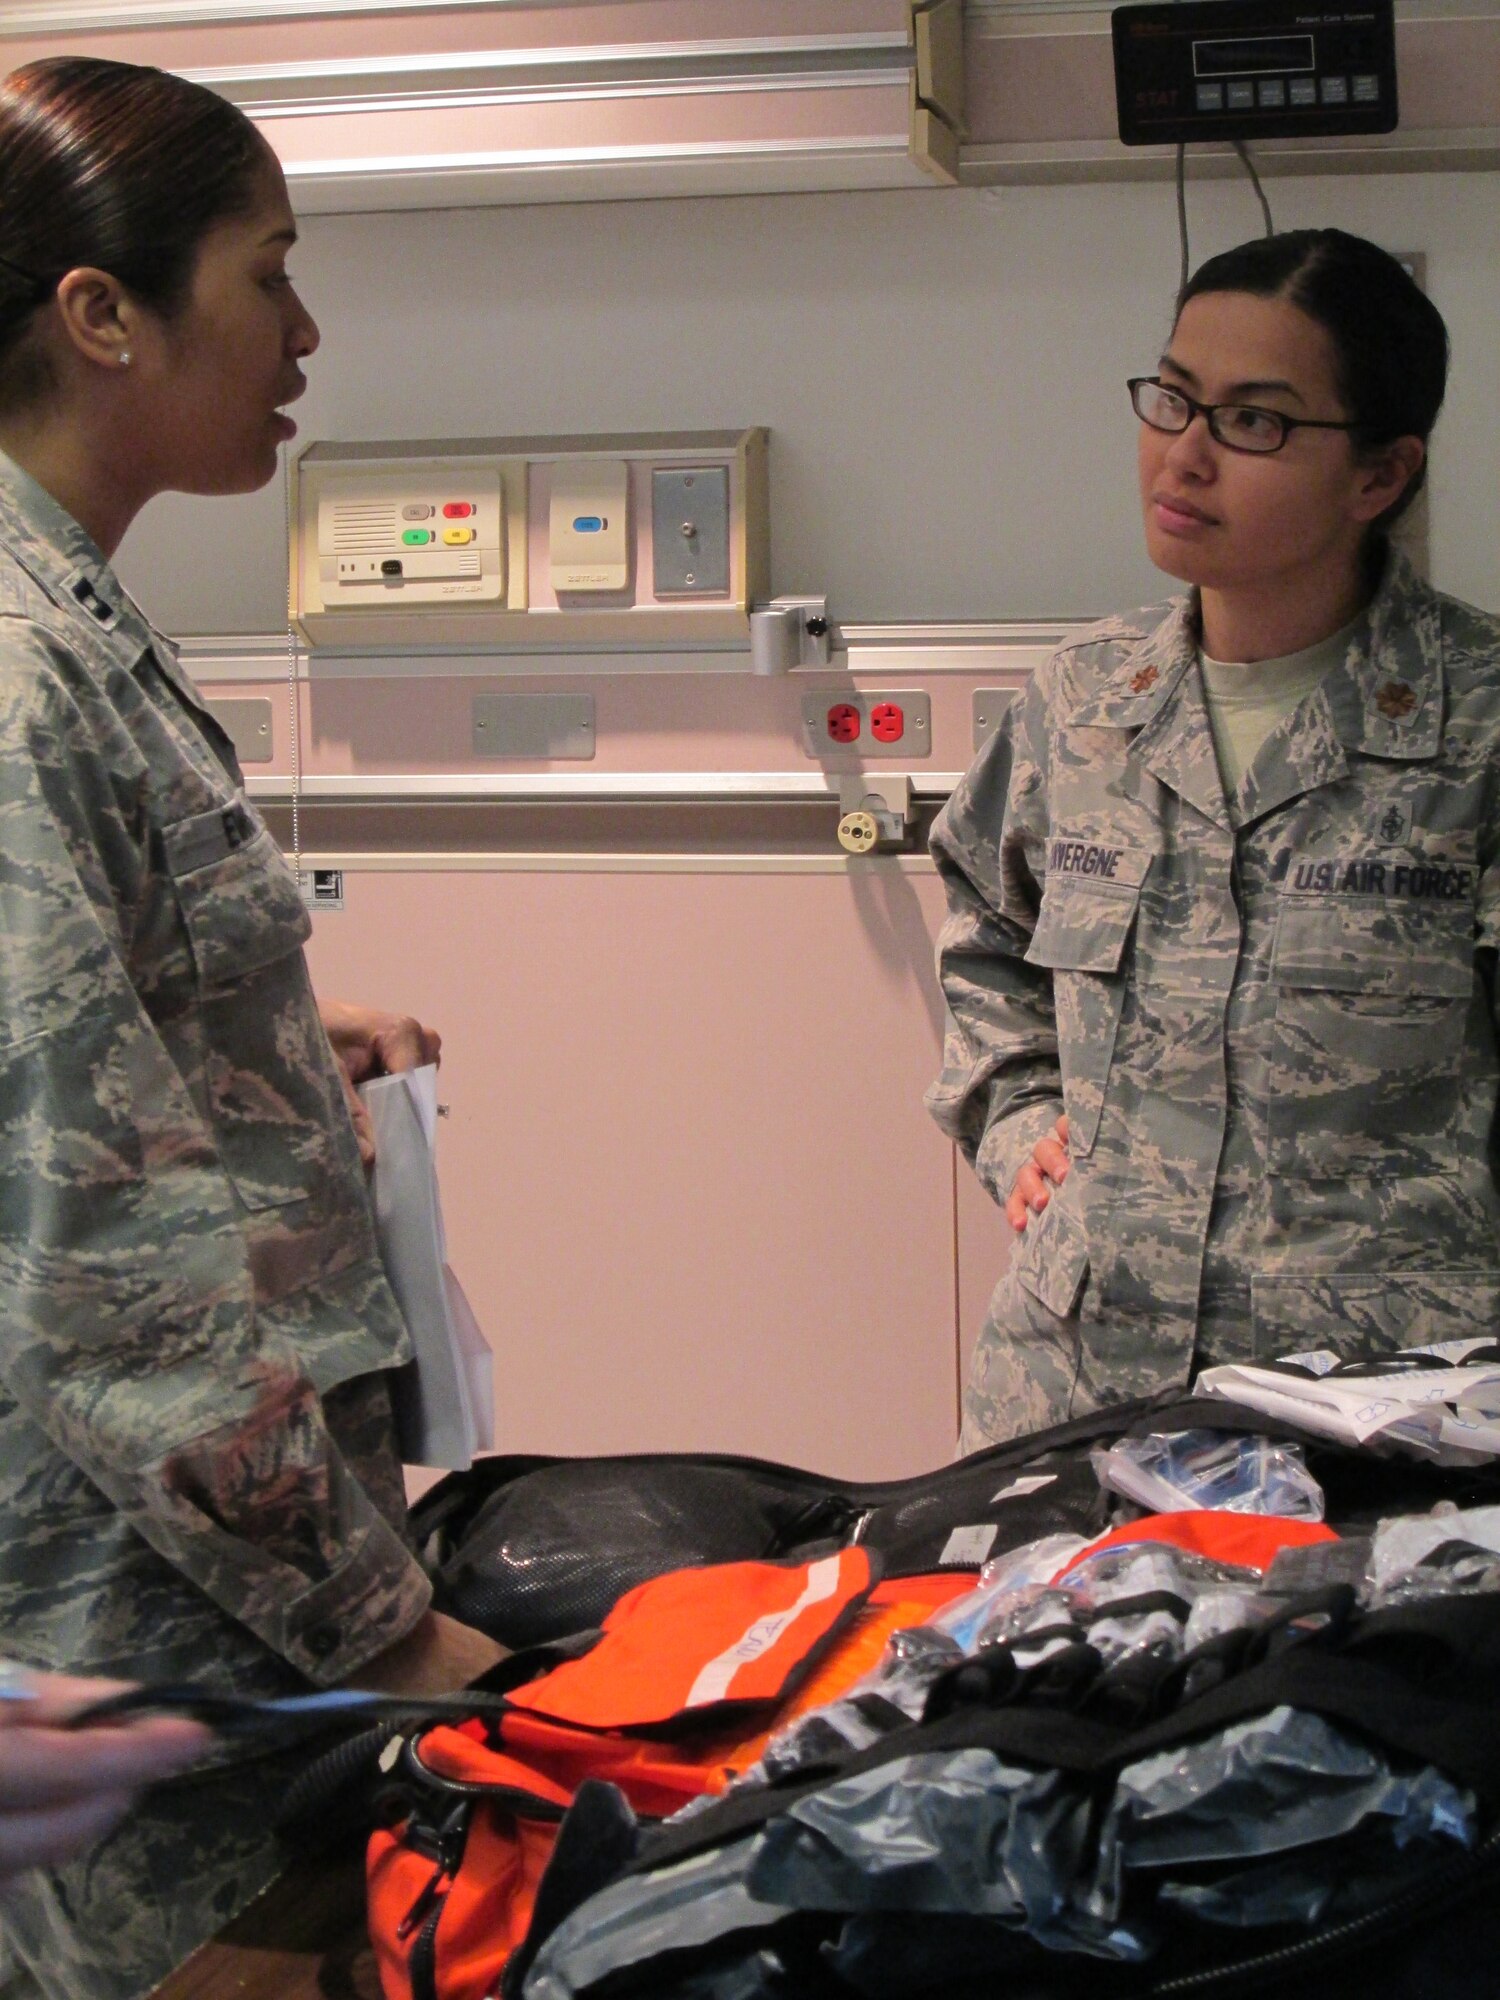 Maj. Jennifer LaVergne (right) and Capt. (Dr.) Patricia Evans discuss stocking backpacks for a medical team during a training held at Joint Base Andrews, January 10, 2013. The training is to ensure the medical team is ready to be part of the 57th Presidential Inauguration as a medical response unit. LaVergne is the Chief of medical readiness, and Evans is a physician, both are with the 79th Medical Wing. (U.S. Air Force Photo/Melanie Moore)